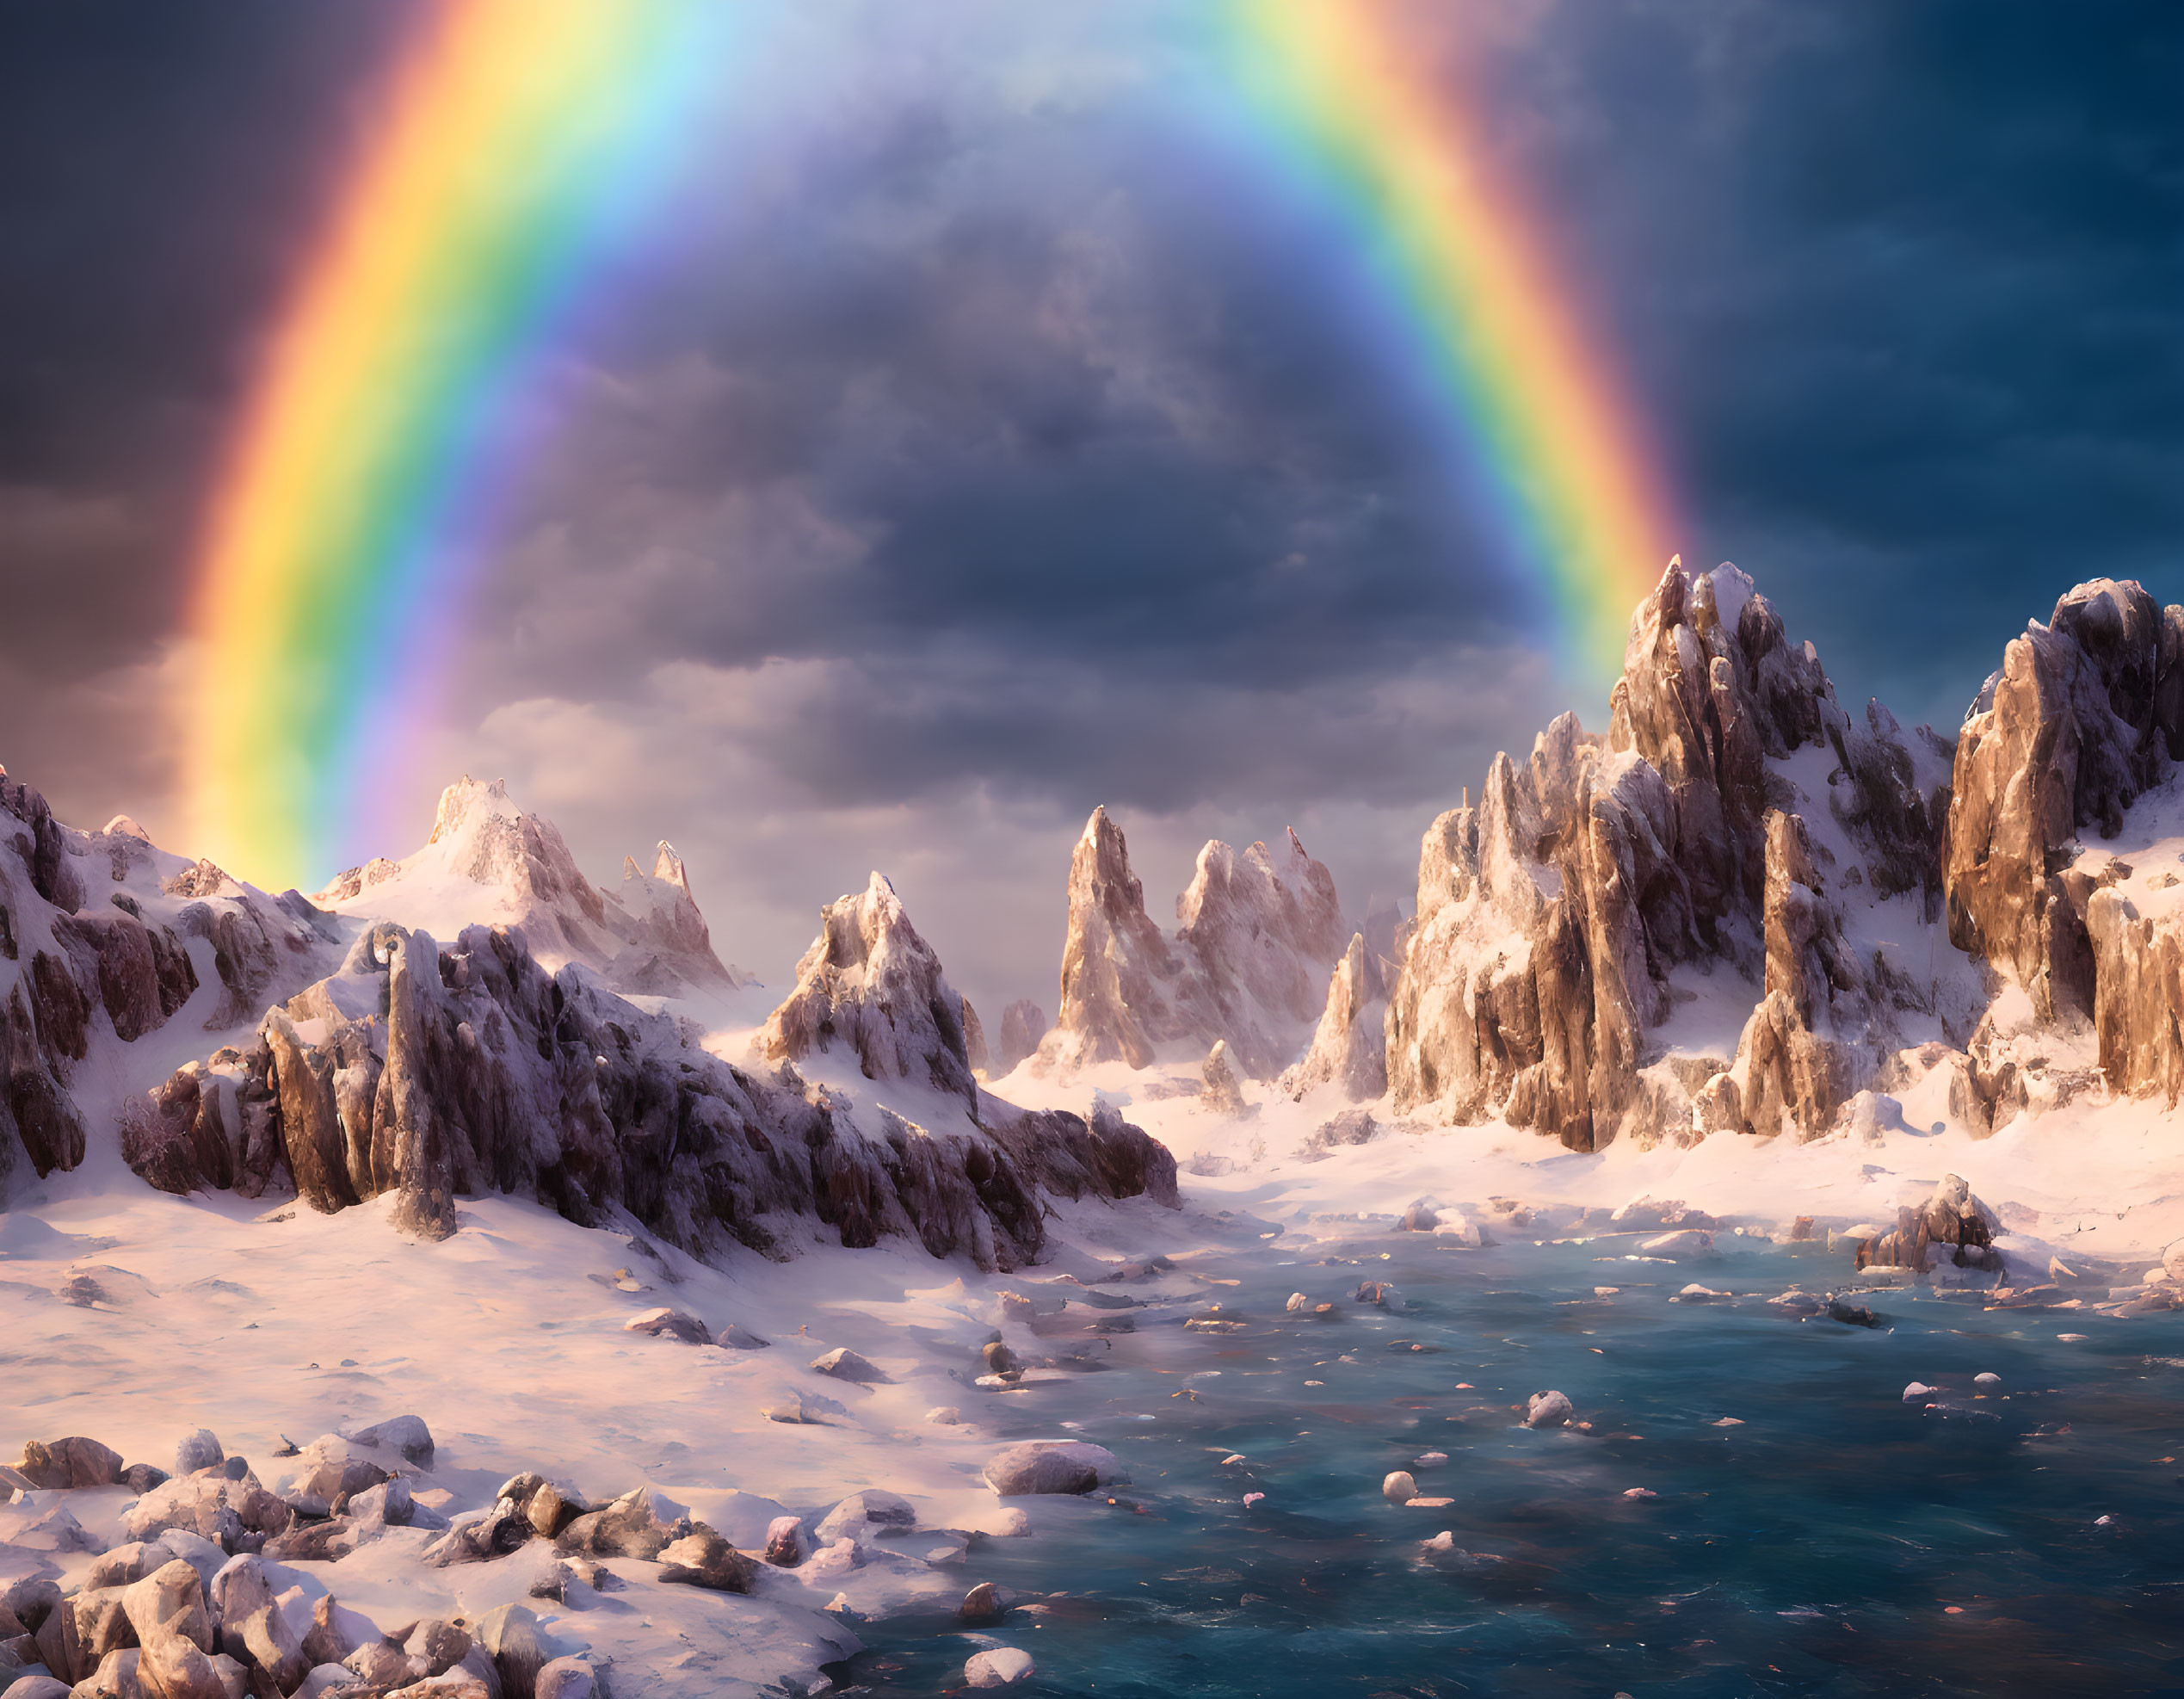 Colorful rainbow over snowy peaks and icy waterway landscape.